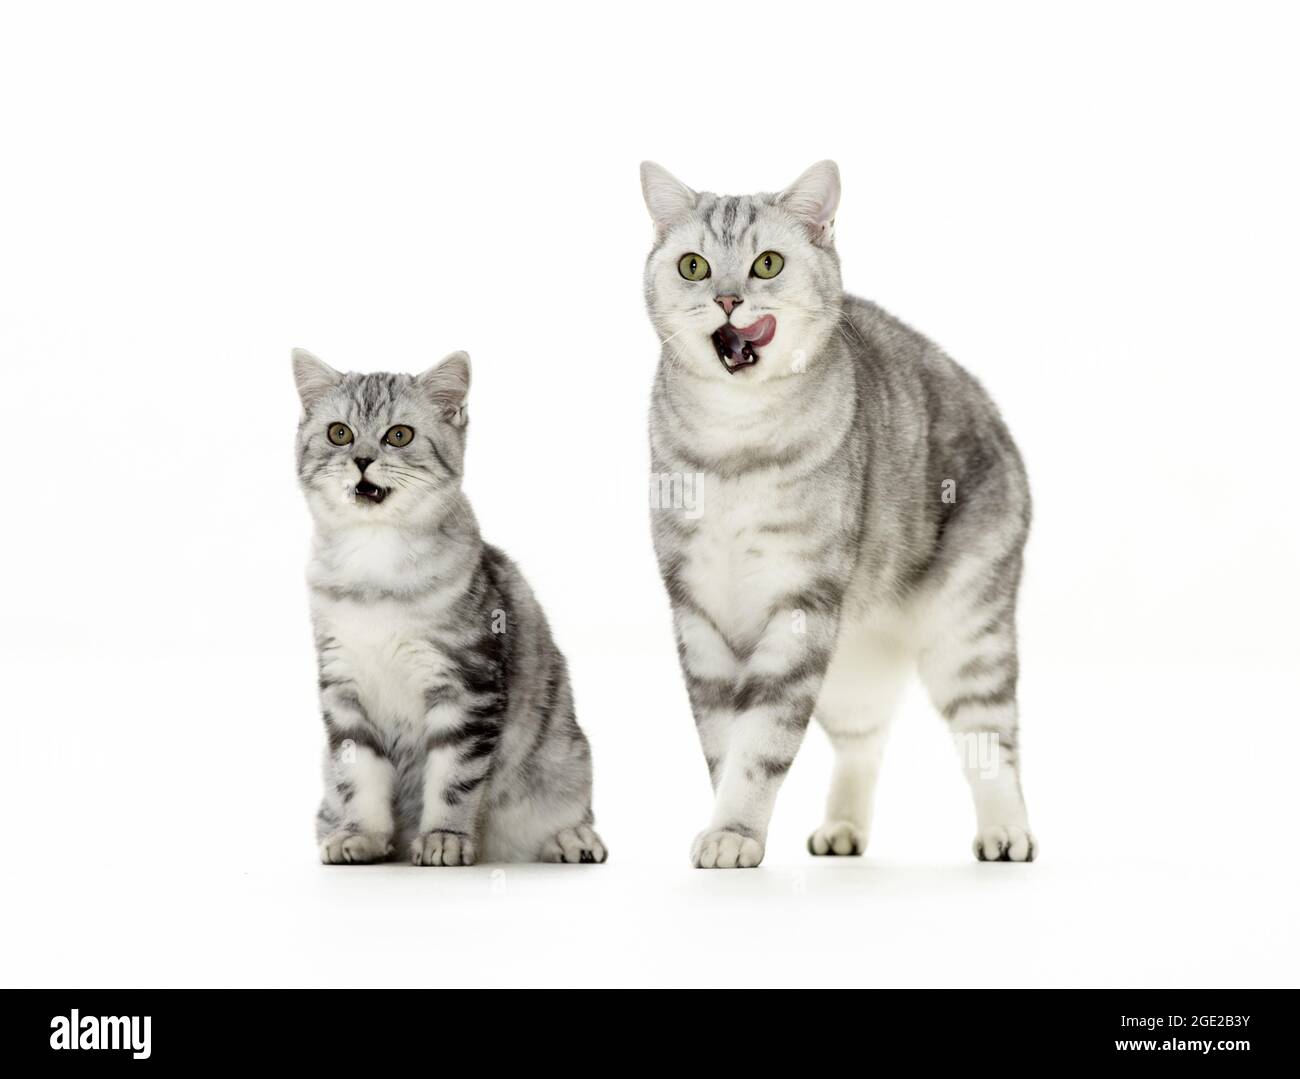 British Shorthair. Tabby mother with kitten. Studio picture against a white background. Germany Stock Photo